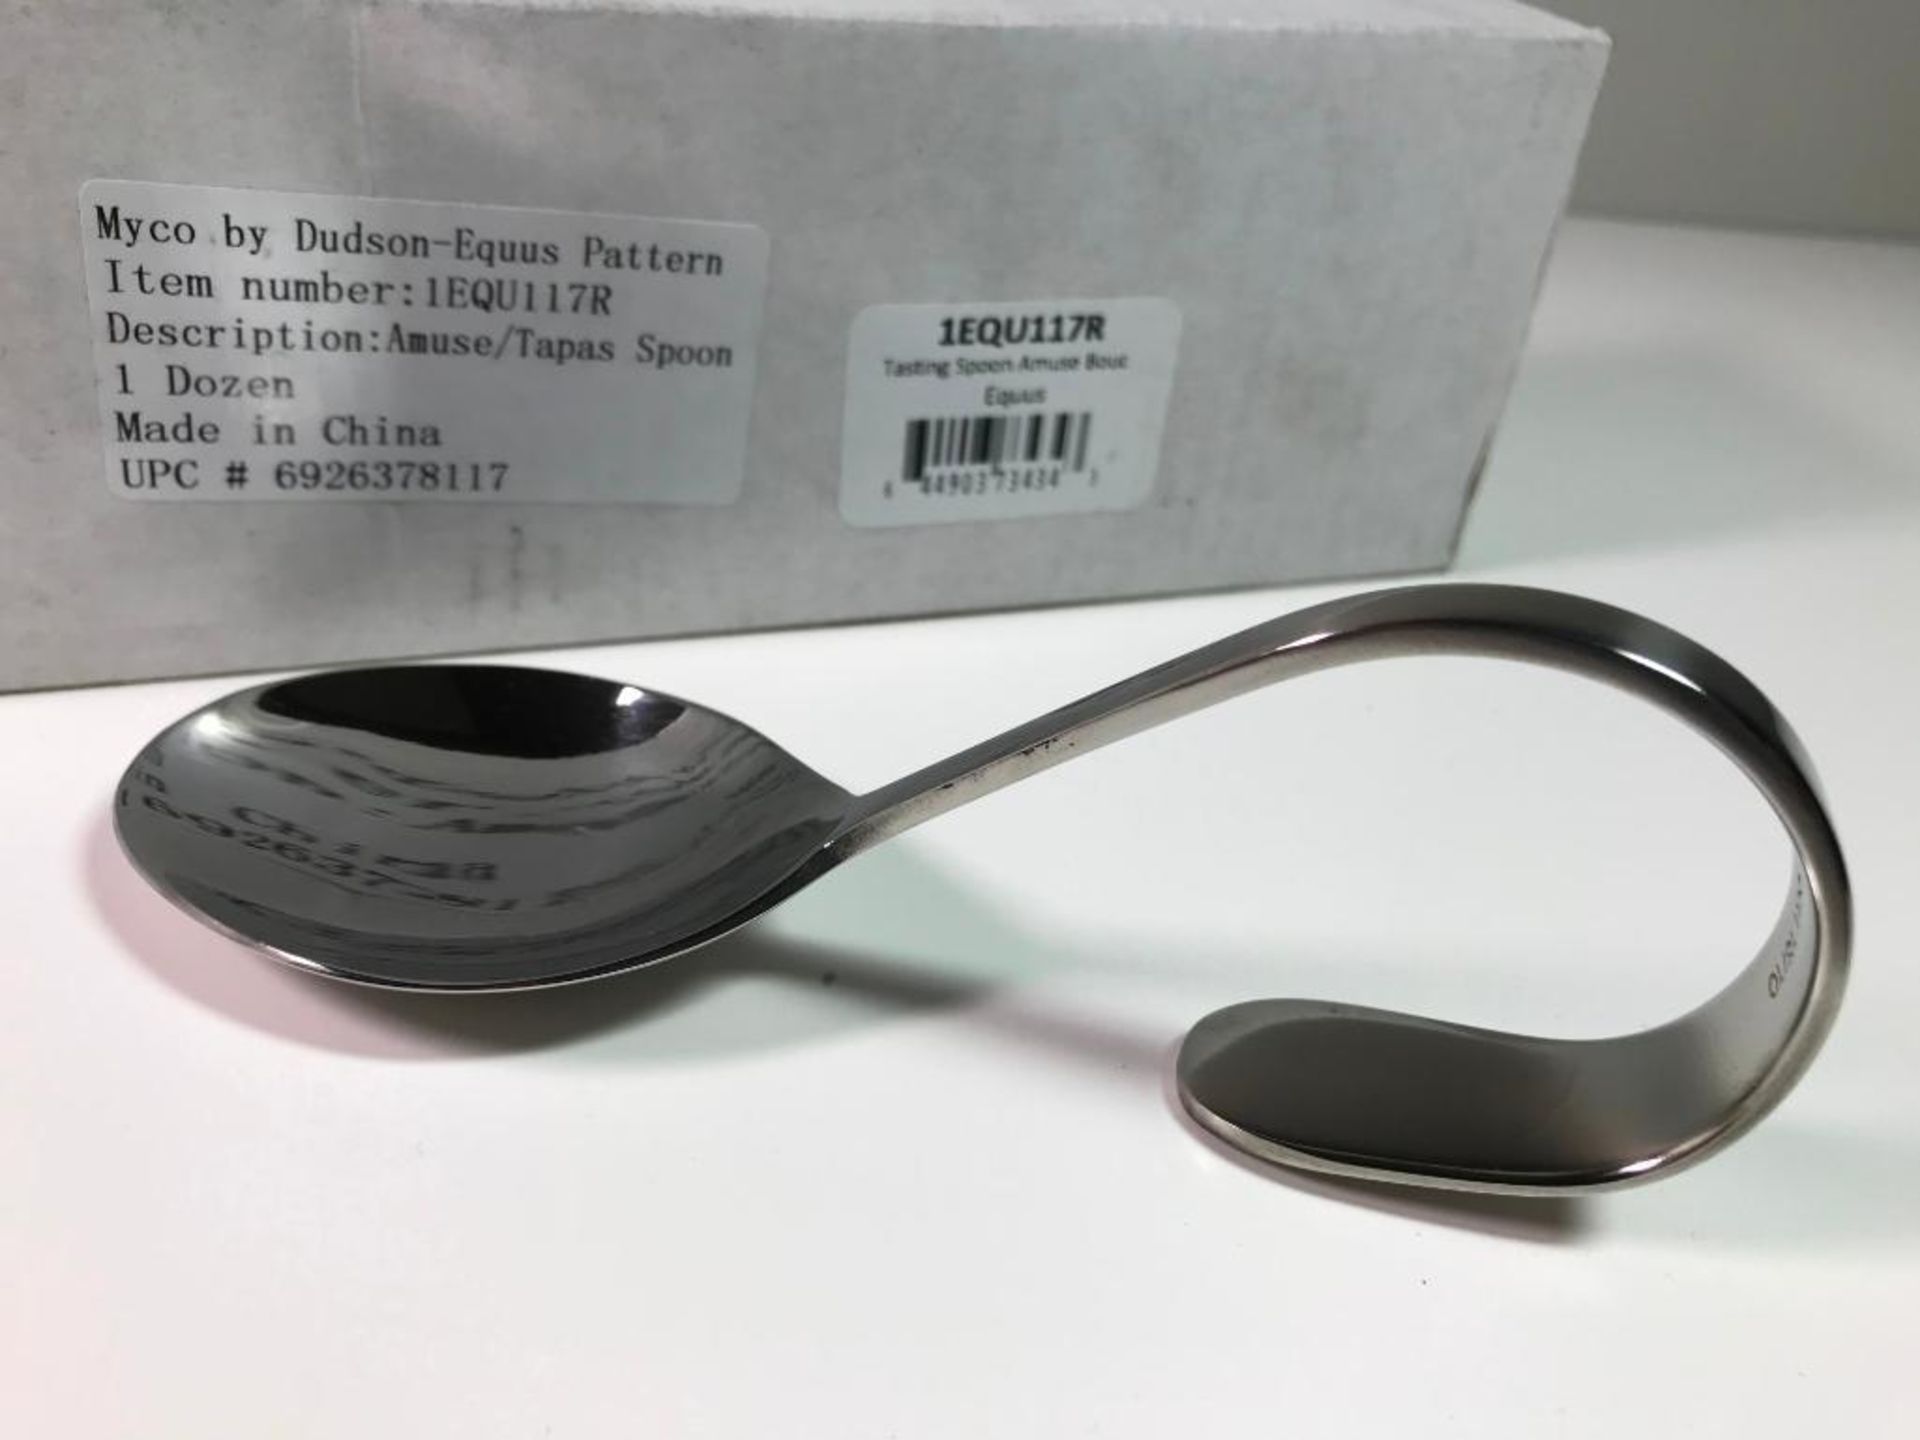 DUDSON EQUUS 5.25" TASTING SPOON - 12/CASE - NEW - Image 3 of 4